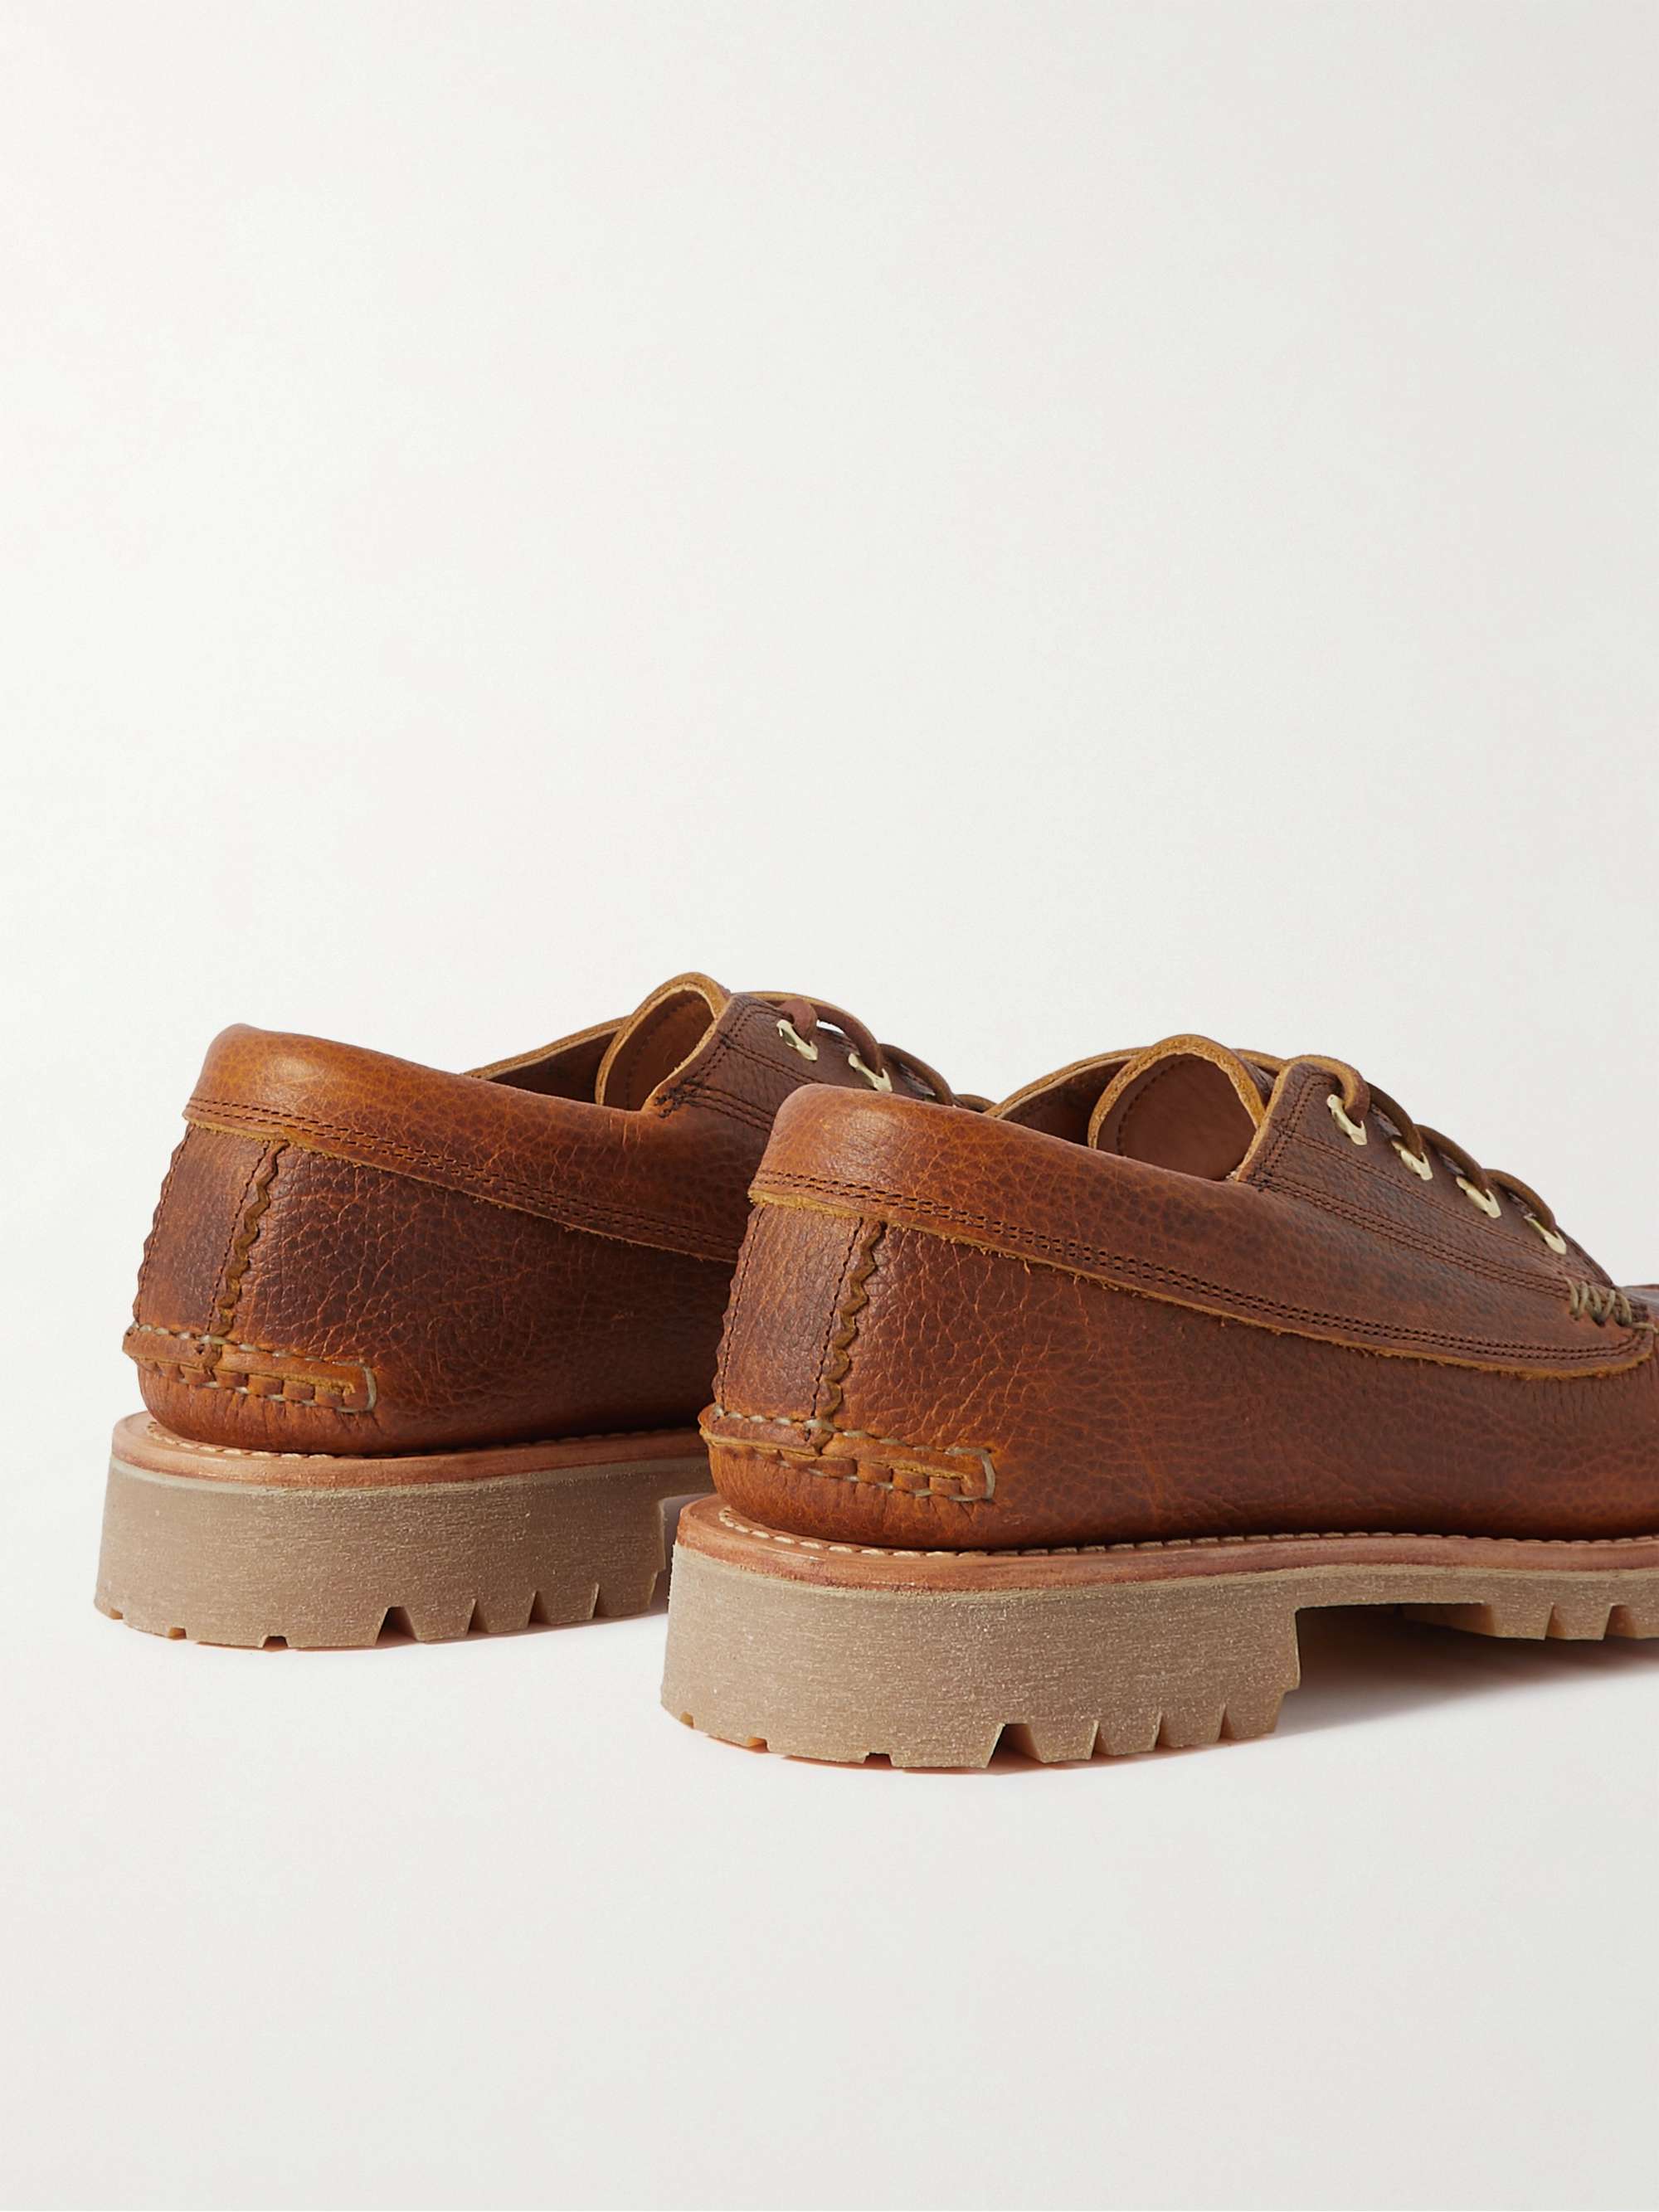 YUKETEN Angler Textured-Leather Boat Shoes